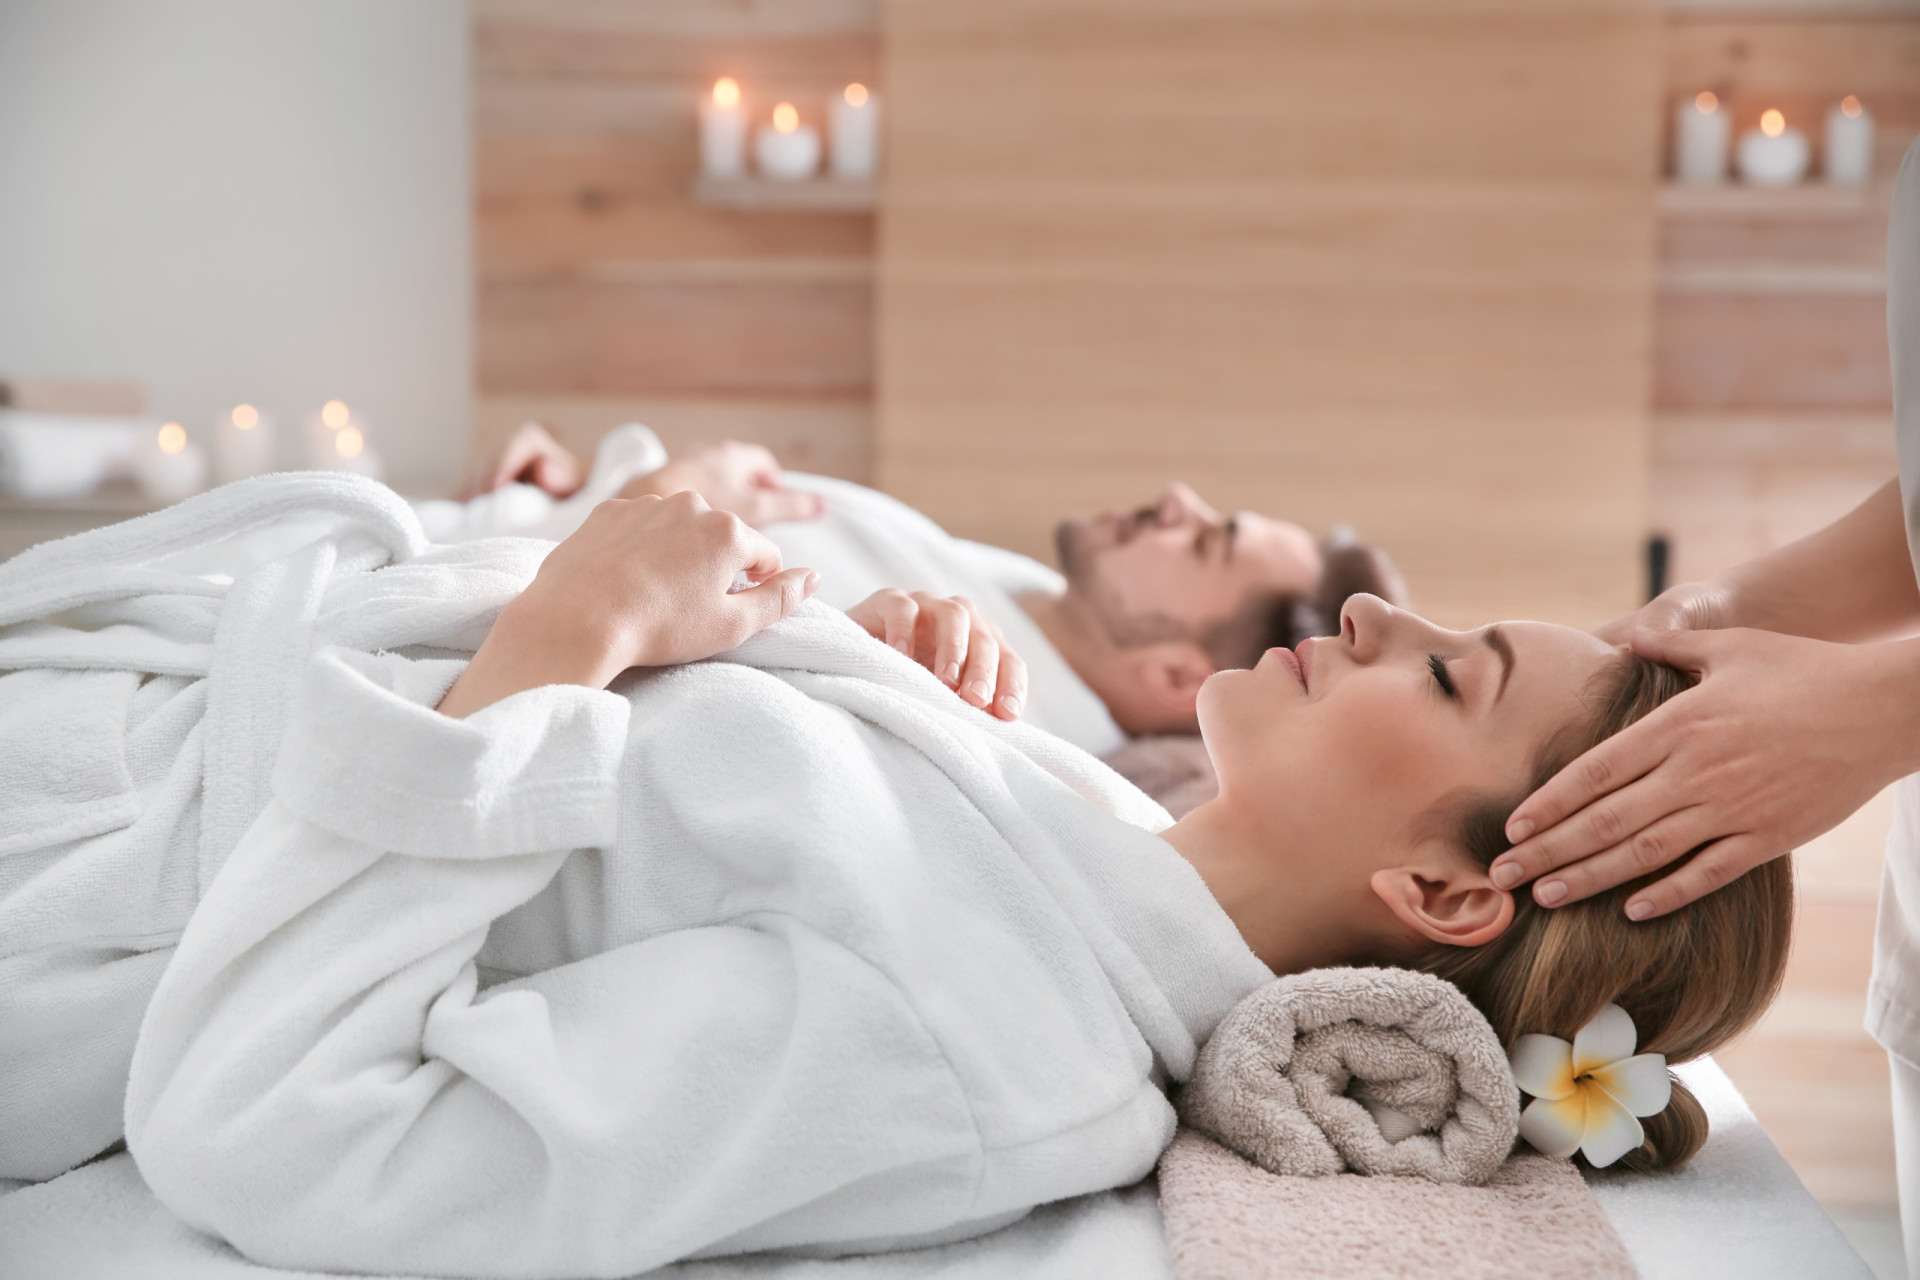 <p>Indulging in a spa session may mean using the plastic. But many guests look forward to a spot of pampering during their break and regard an hour or so of well-being therapy an essential treat. If it is included then, hey, no sweat!</p><p>You may also like:<a href="https://www.starsinsider.com/n/476502?utm_source=msn.com&utm_medium=display&utm_campaign=referral_description&utm_content=562106en-en"> How these rock stars got their nicknames</a></p>